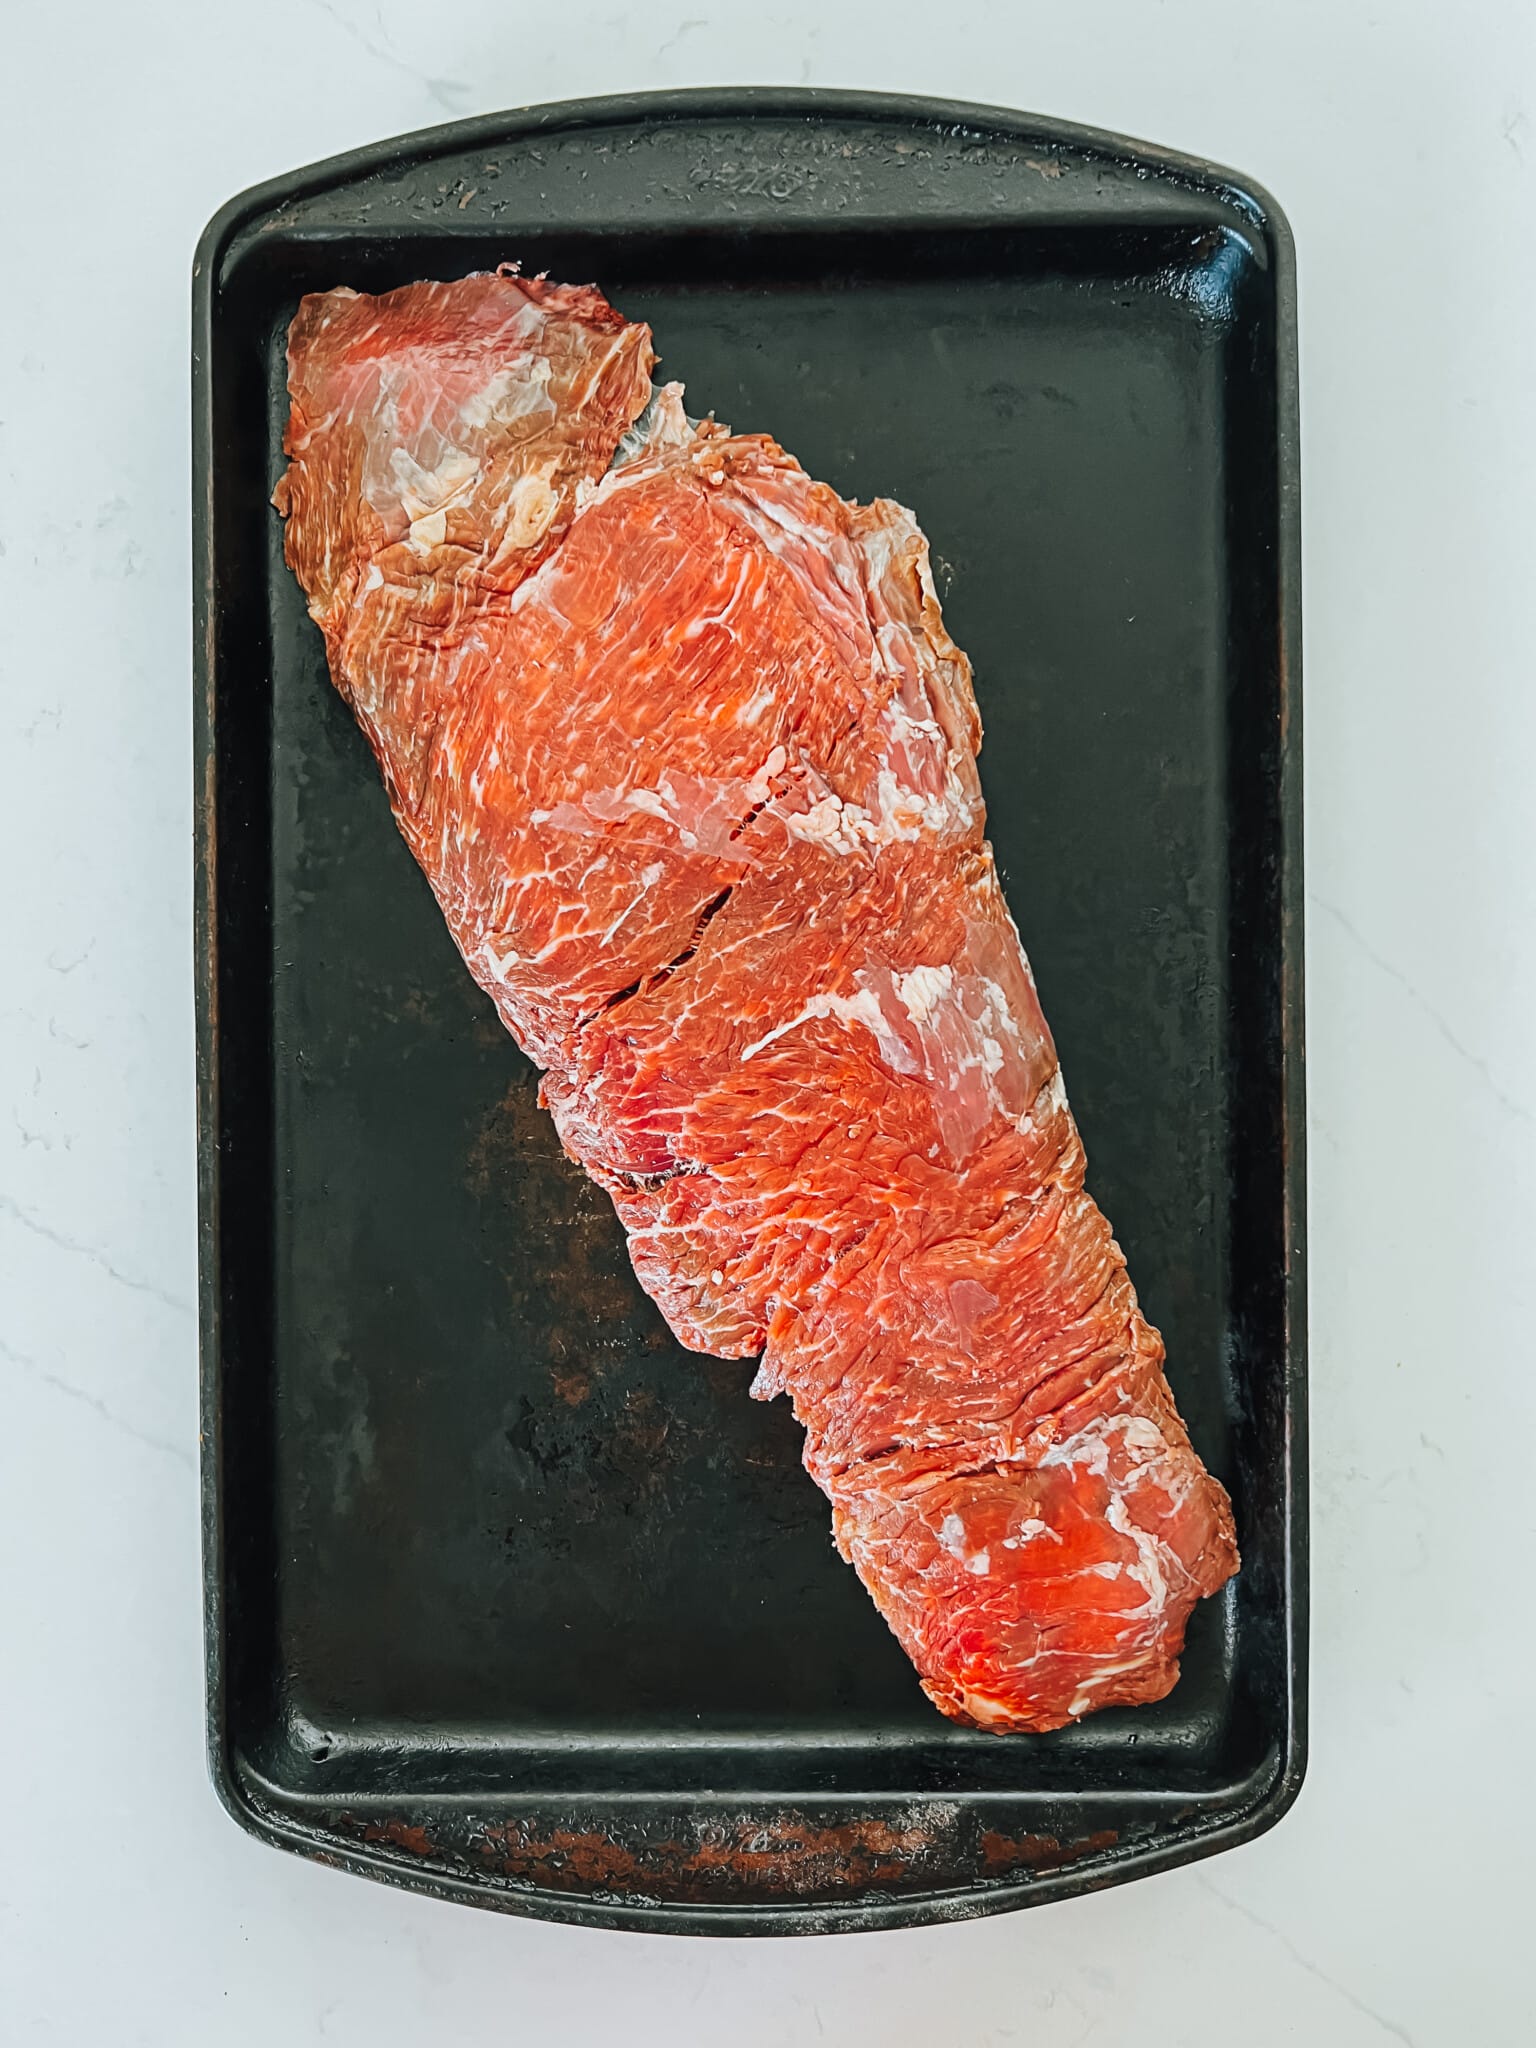 Whole bavette steak laid on to black baking sheet showing thin grain and marbling.  